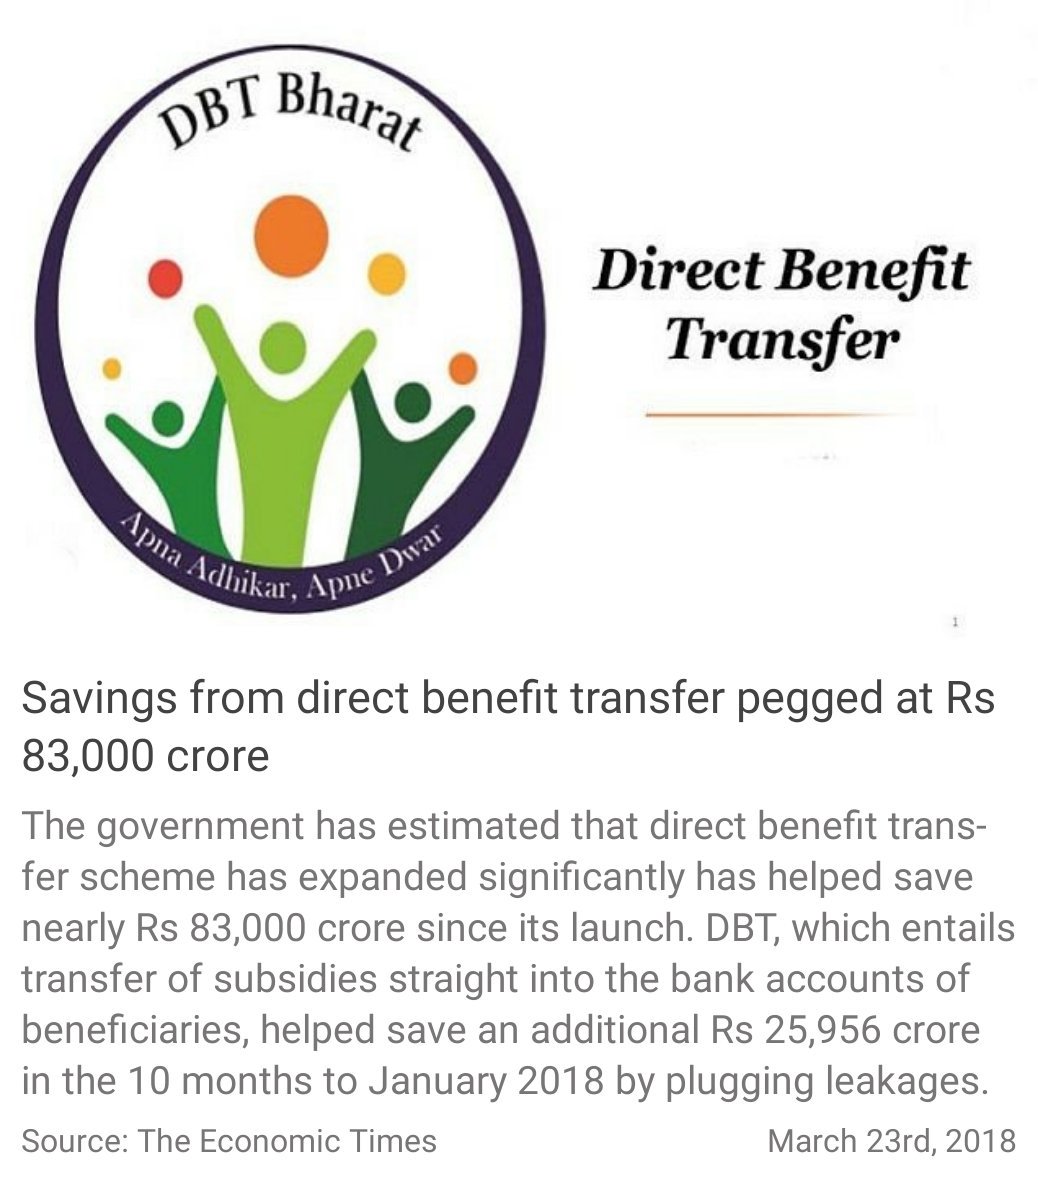 Savings from direct benefit transfer pegged at Rs 83,000 crore economictimes.indiatimes.com/industry/banki…